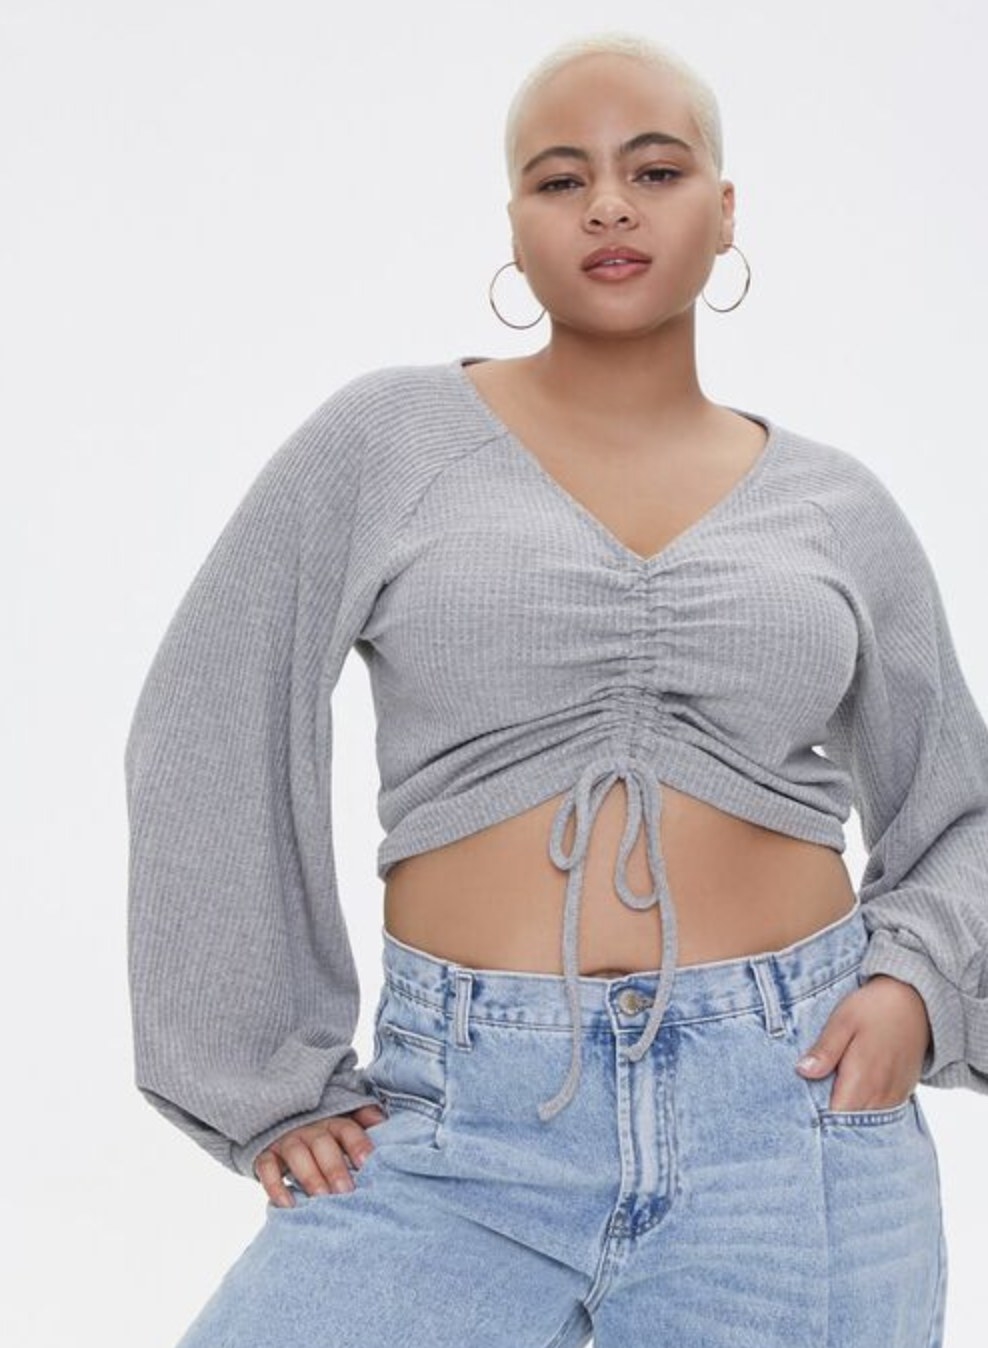 Model is wearing a grey crop top and blue jeans